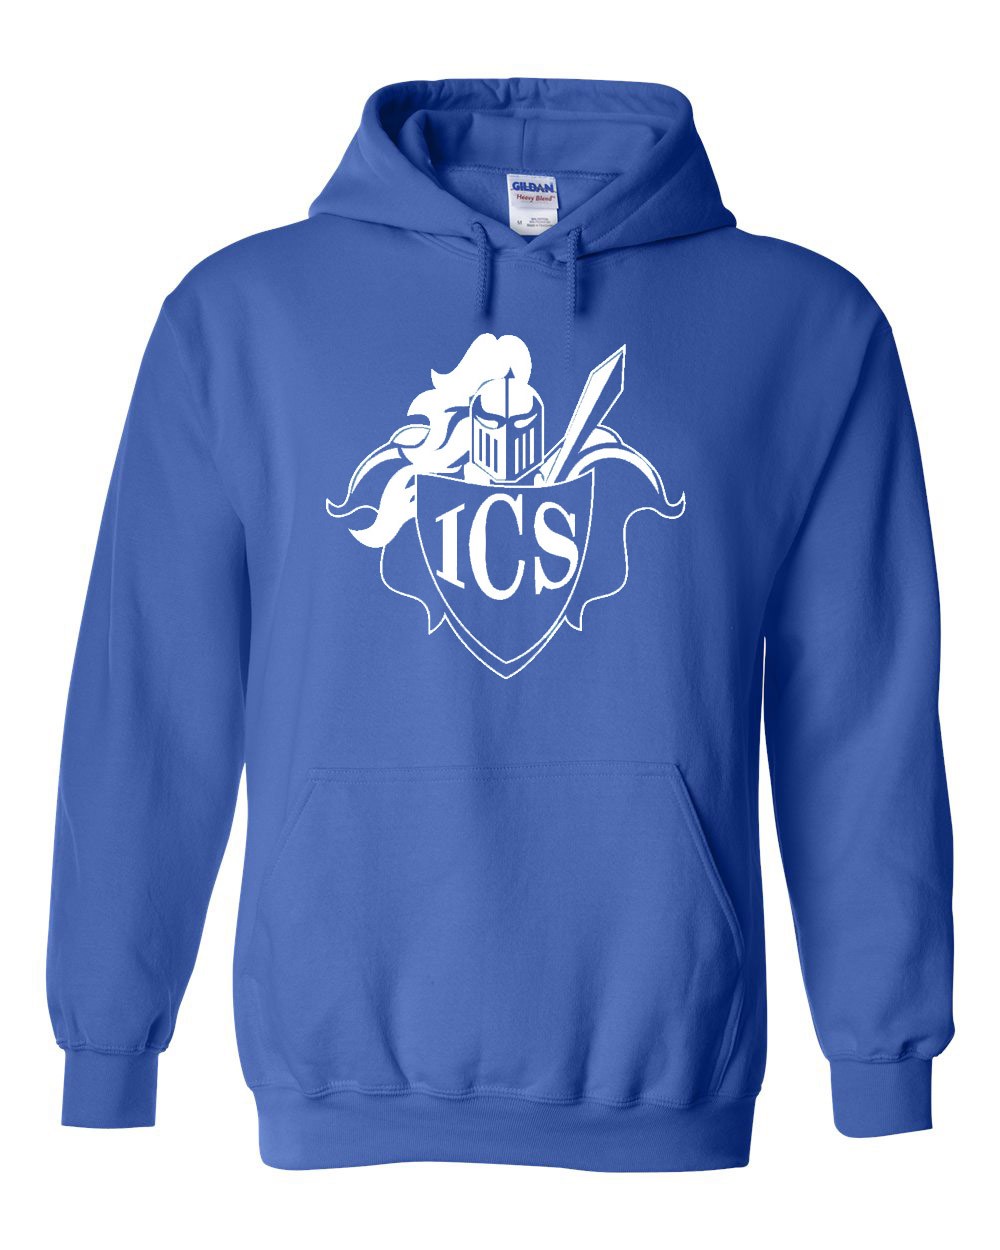 ICS Staff Pullover Hoodie w/ White Logo #F19 - Please allow 2-3 Weeks for Delivery